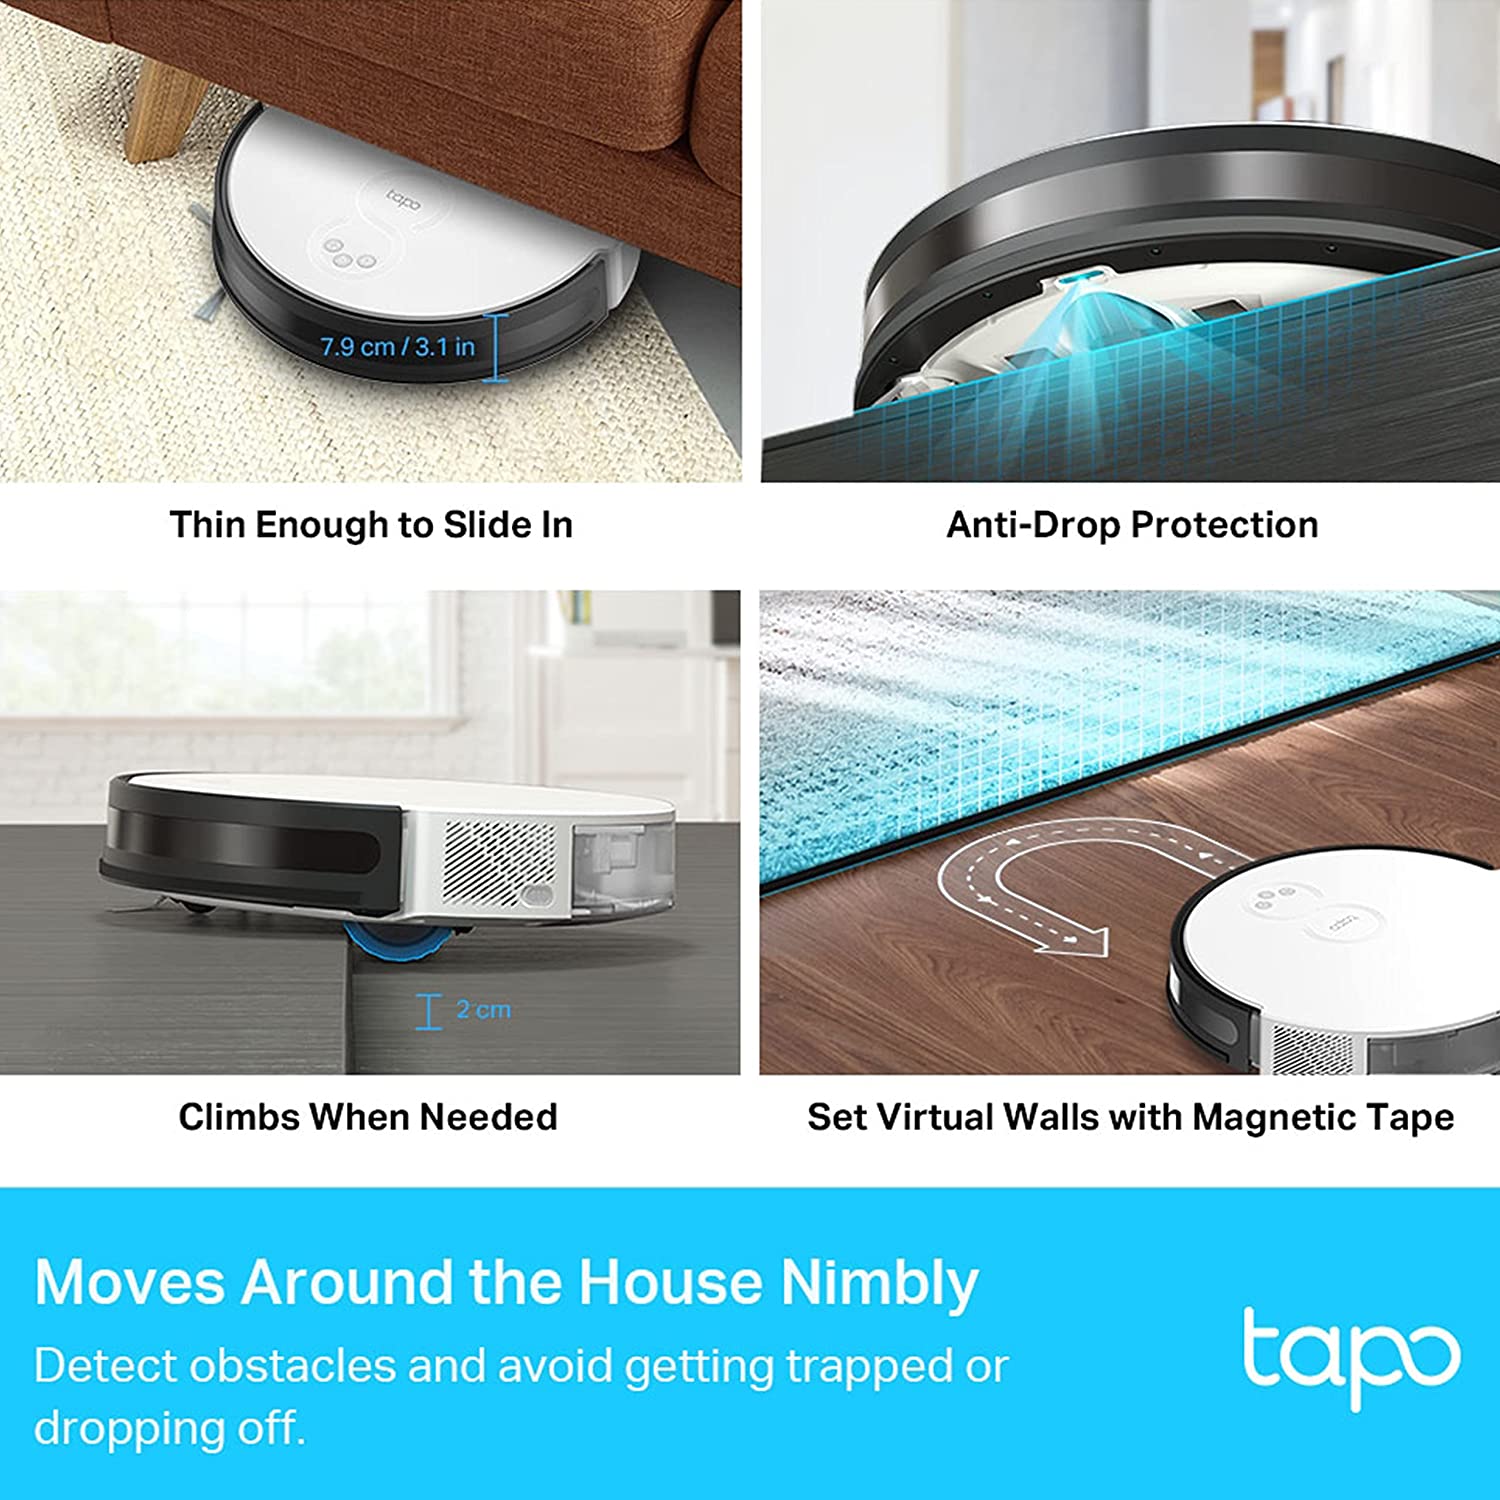 TP-Link Tapo RV10 2-in-1 Robotic Vacuum Cleaner & Mop, 4-Level 2000Pa Suction, Google Assistant & Alexa Compatible | Auto-Charging | Auto-Boost | 3-Hour Continuous Cleaning | Hub Included